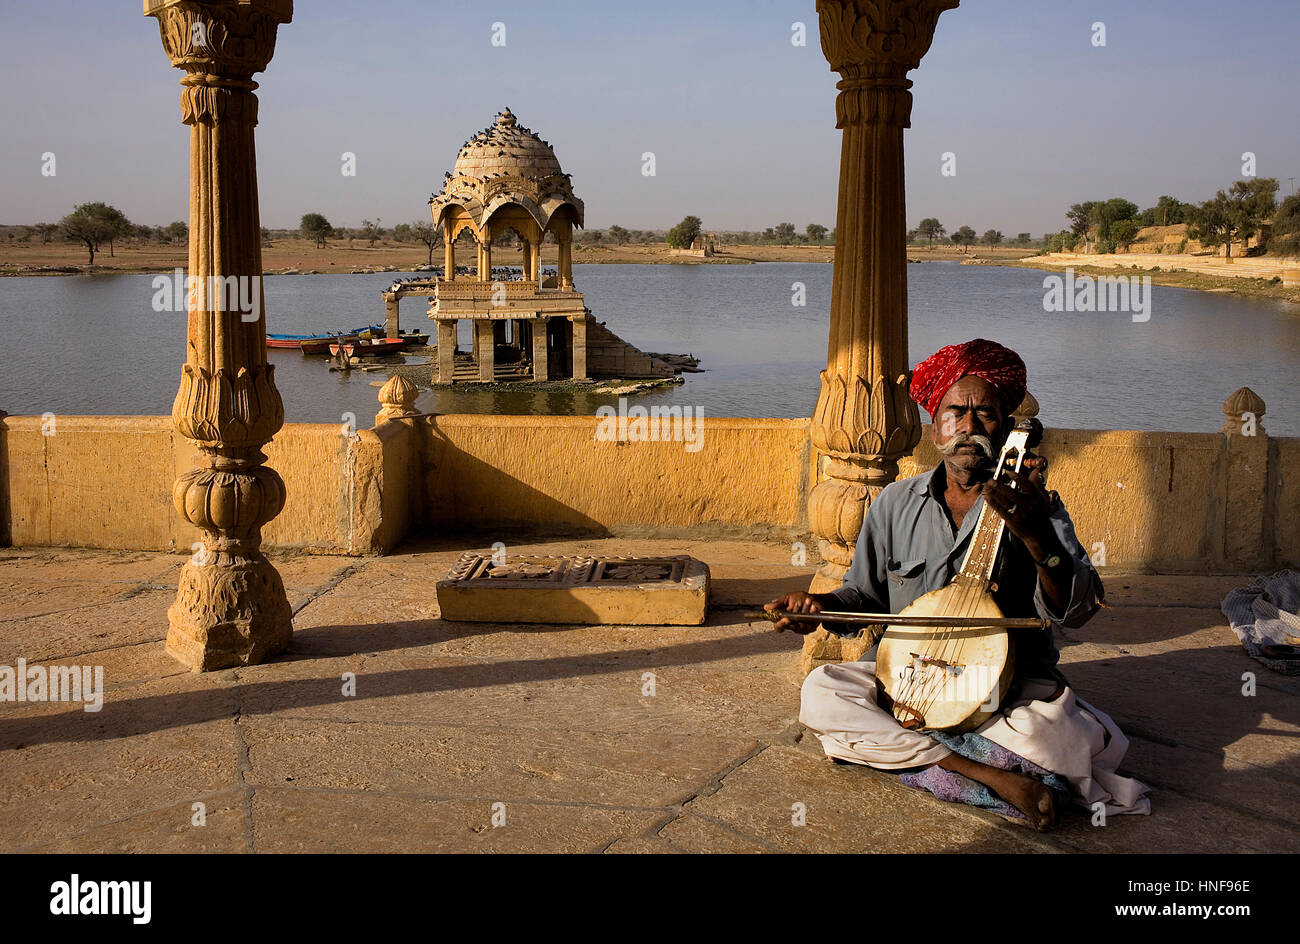 Busker, musician, Gadi Sagar, the tank was once the water supply of the city and is surrounded by small temples and shrines, Jaisalmer,Rajasthan,India Stock Photo